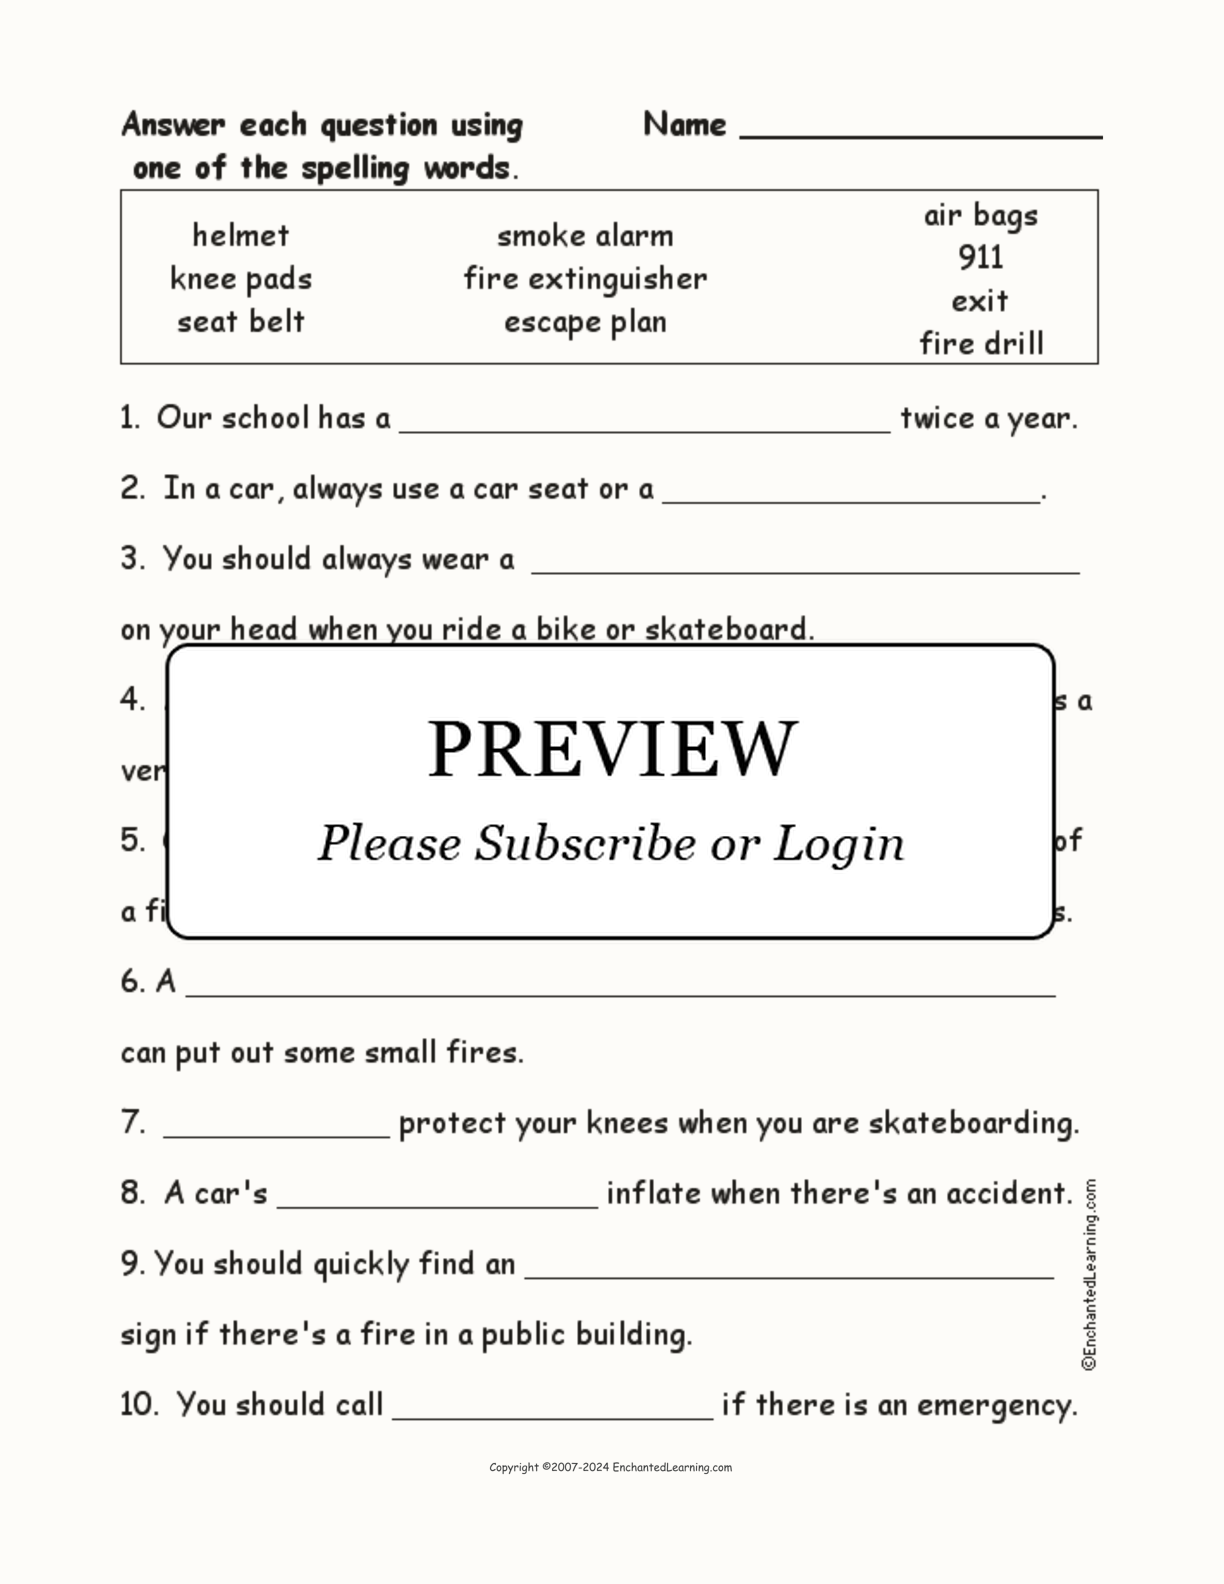 Safety: Spelling Word Questions interactive worksheet page 1